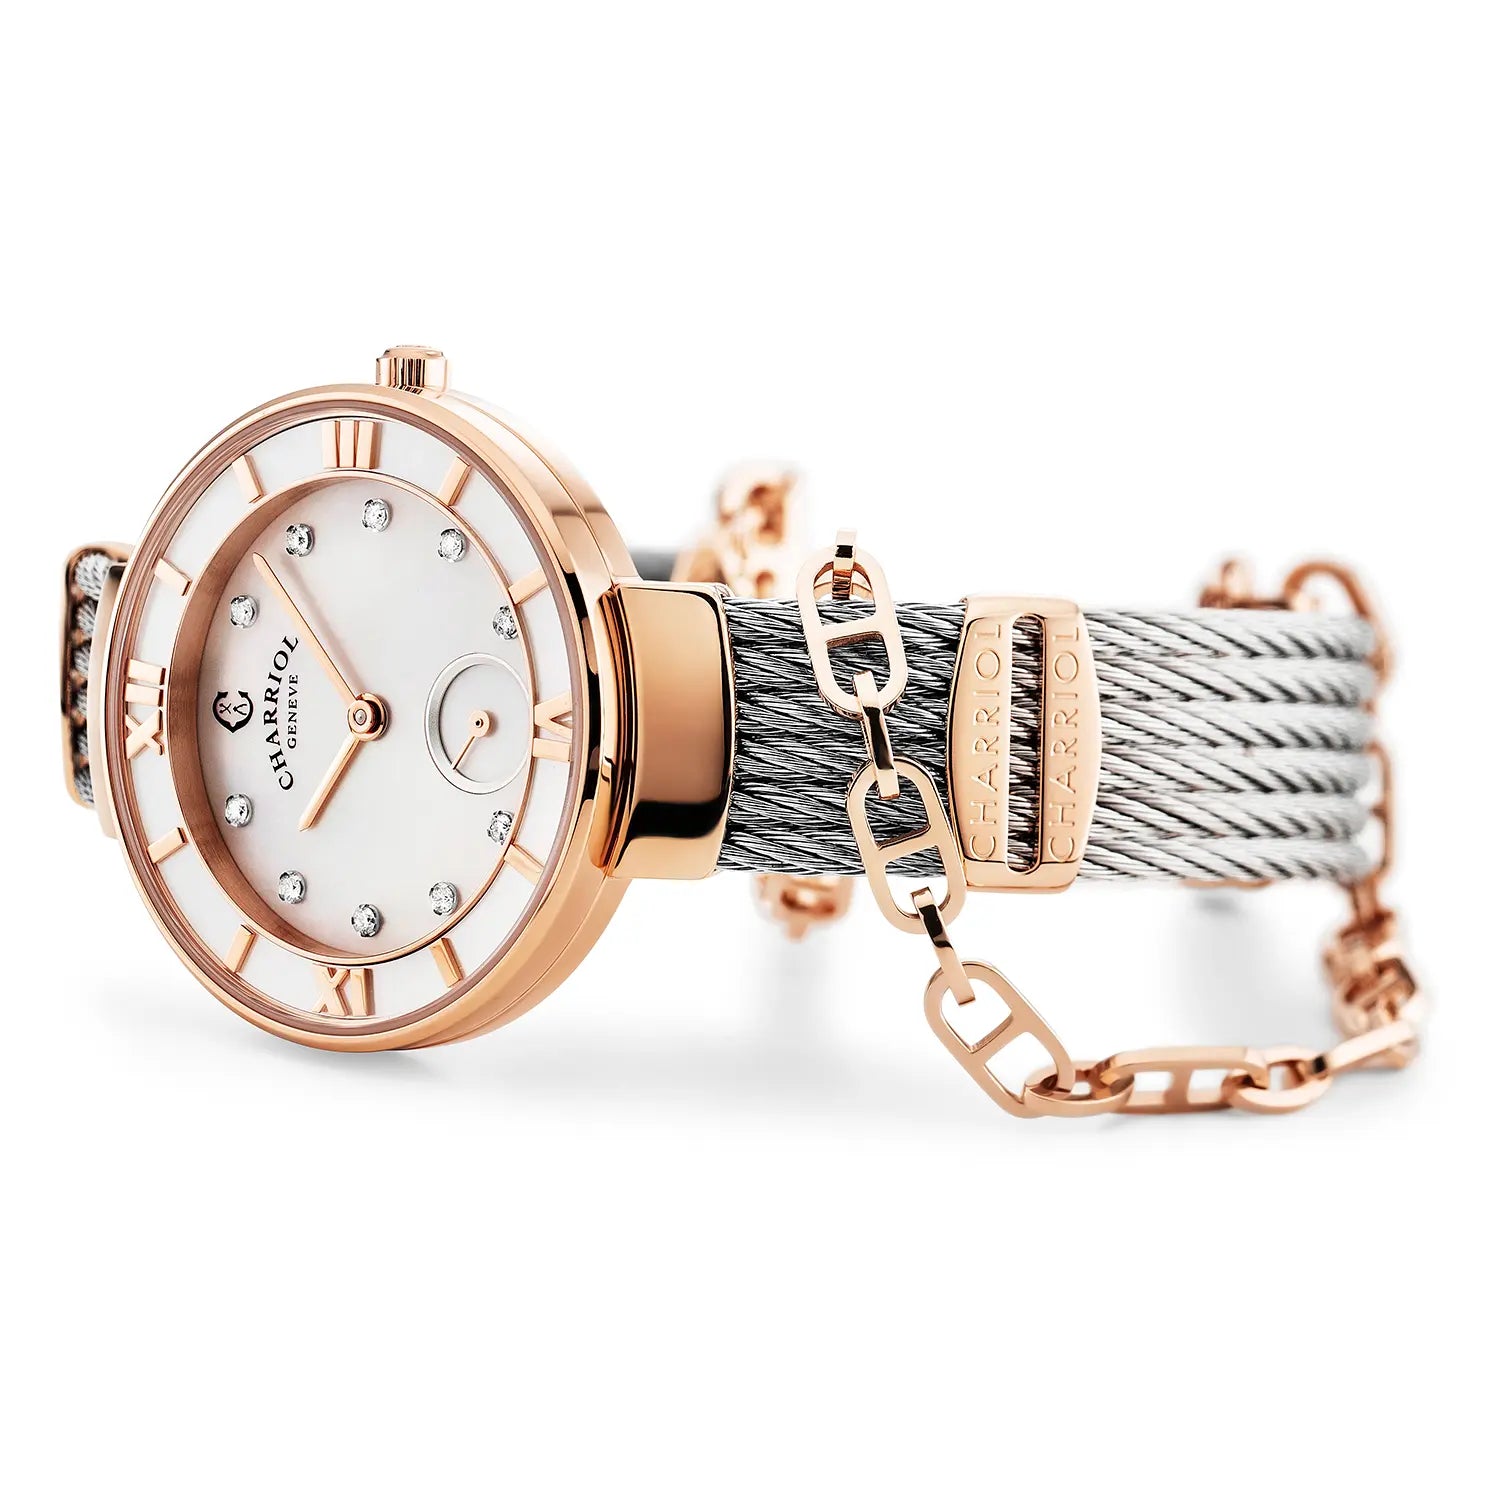 ST TROPEZ, 30MM, QUARTZ CALIBRE, MOTHER-OF-PEARL WITH 10 DIAMONDS DIAL, MOTHER-OF-PEARL BEZEL, STEEL CABLE BRACELET - Charriol Geneve -  Watch